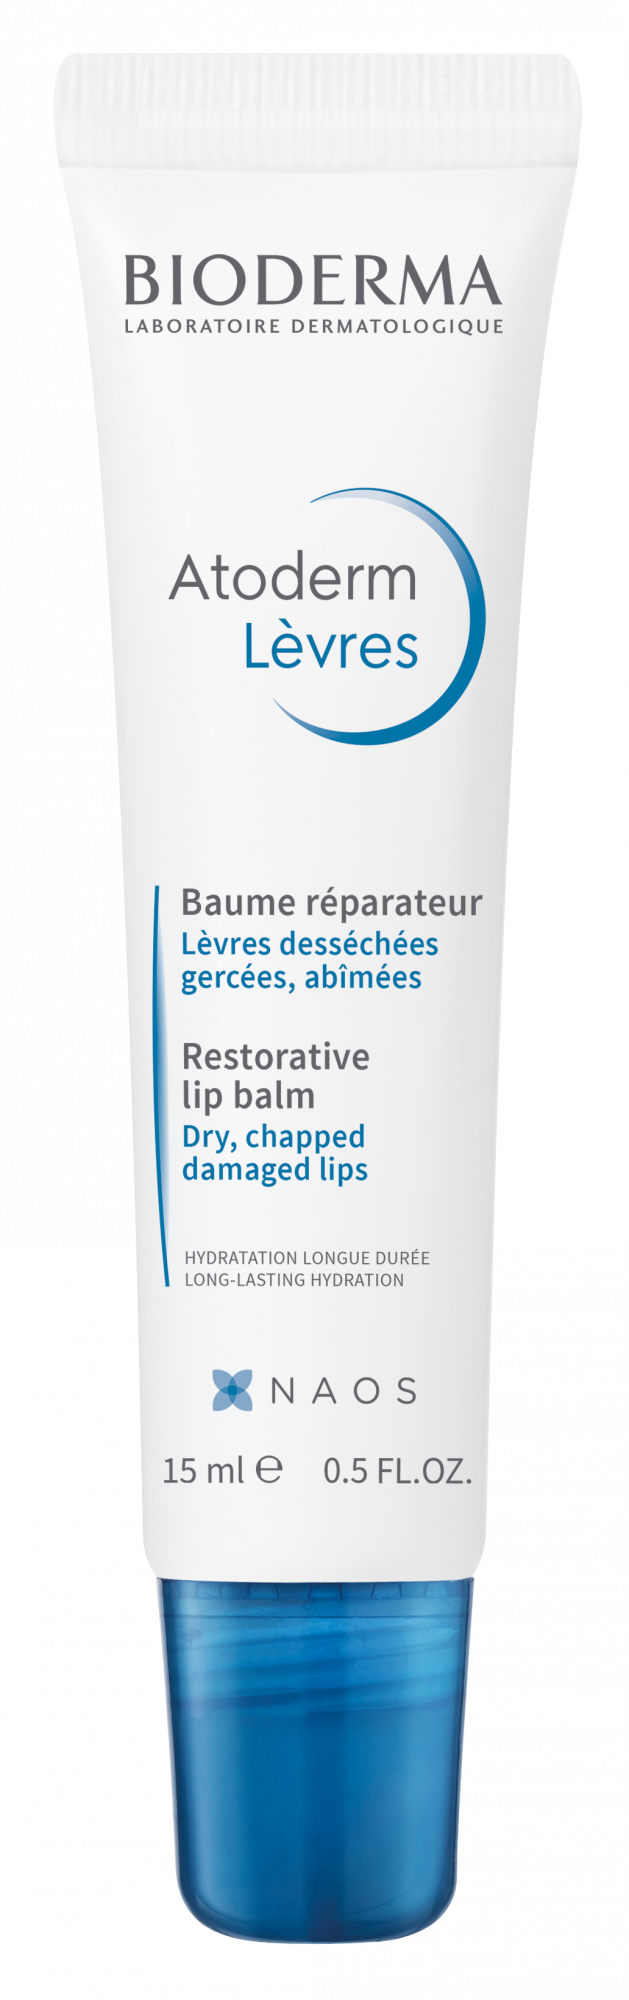 https://www.bioderma.pe/sites/pe/files/styles/fancybox_2000_2000/public/products/%7B37252%7D_%7BBIO_ATODERM_BAUME_LEVRES%7D_%7B28095W%7D.png?itok=OAgaw6O6